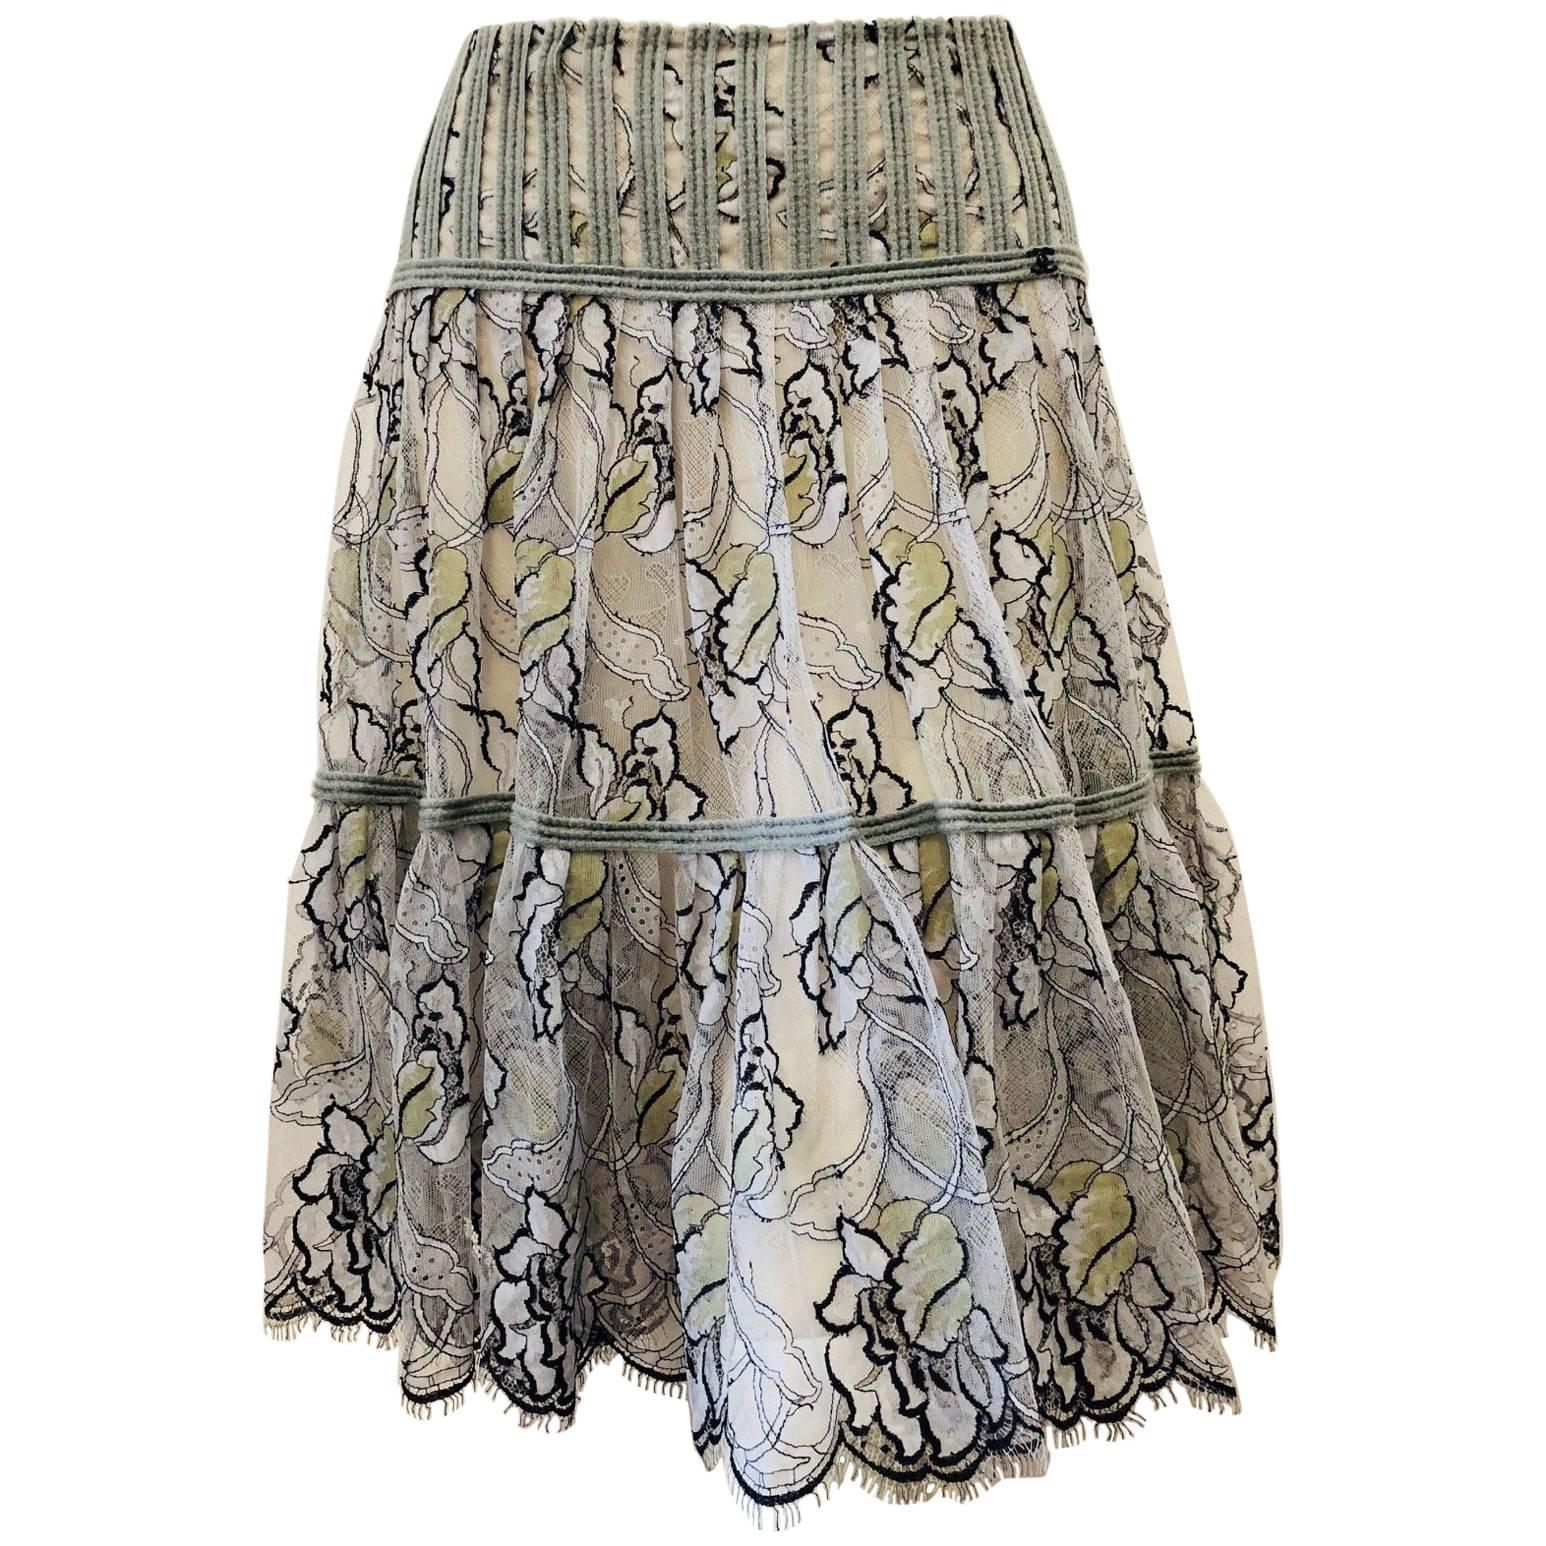 Charming Chanel Lace in Grey, Black and Green Floral Print 3 Tier Pleated Skirt 